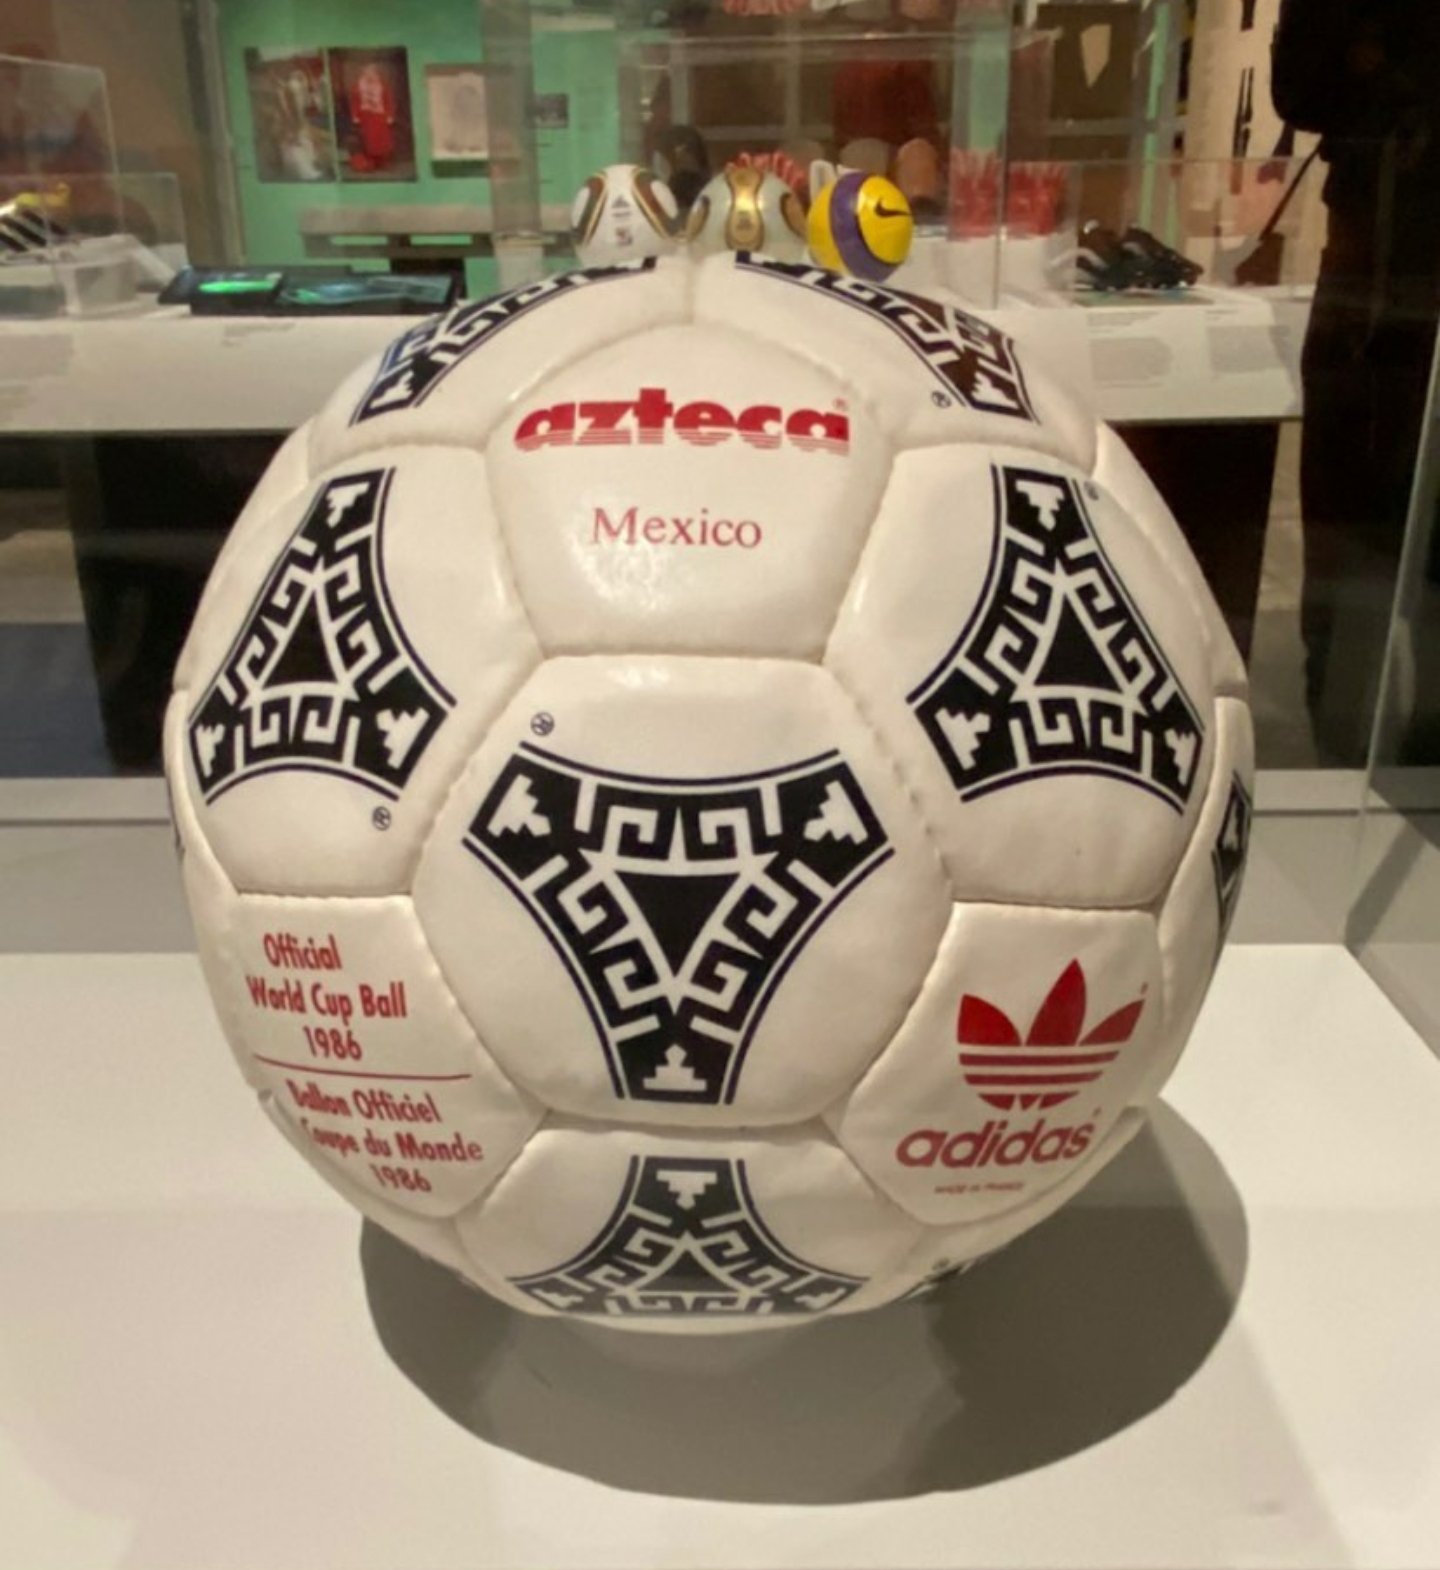 Rebaja vitalidad Perla adiFamily on Twitter: "Original #adidas #Azteca football from the 1986  Mexico World Cup https://t.co/5aIAY0eY8w" / Twitter